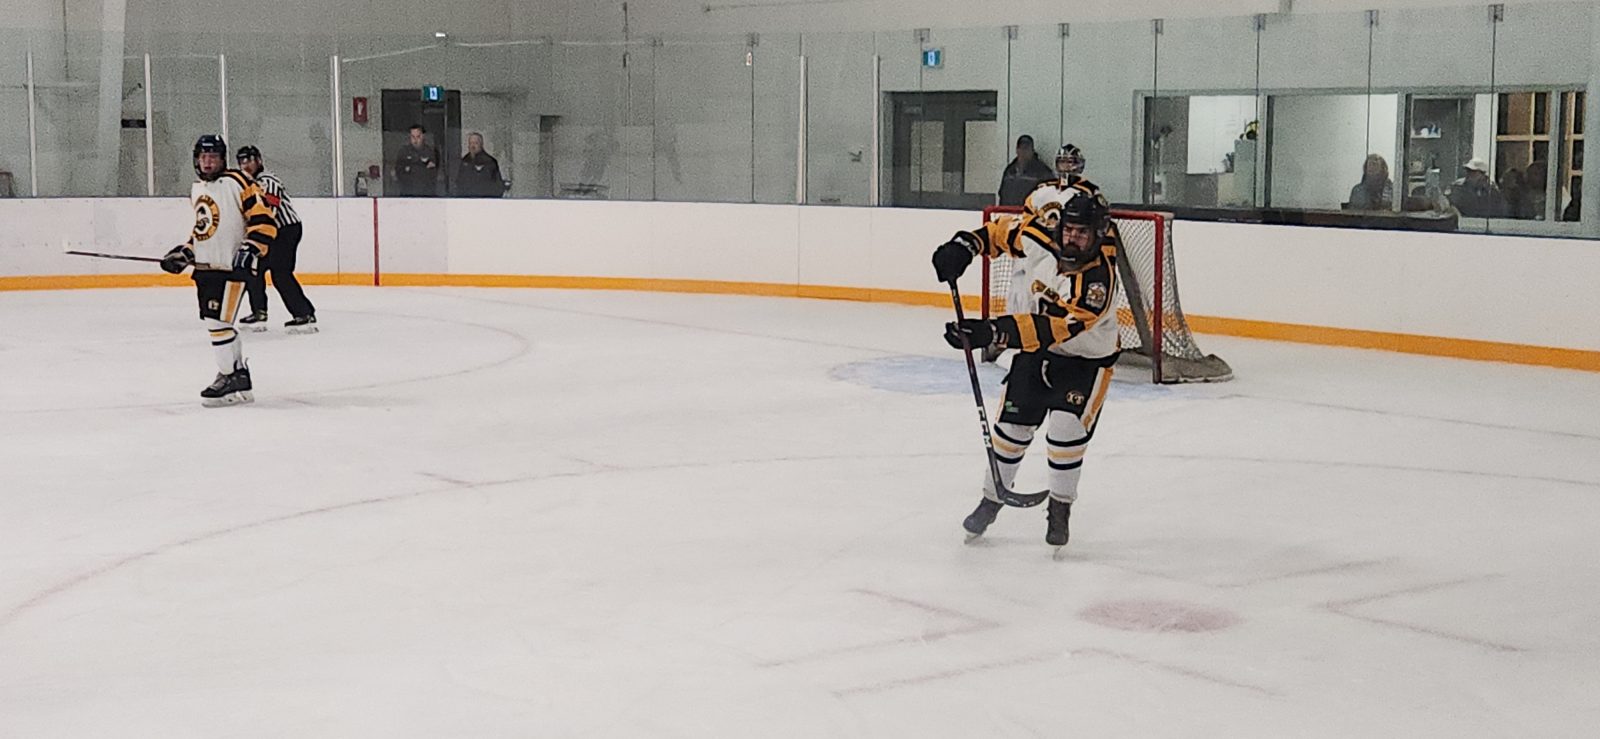 Cougars defeat Metcalfe 6-2, Lose 8-4 to Gatineau